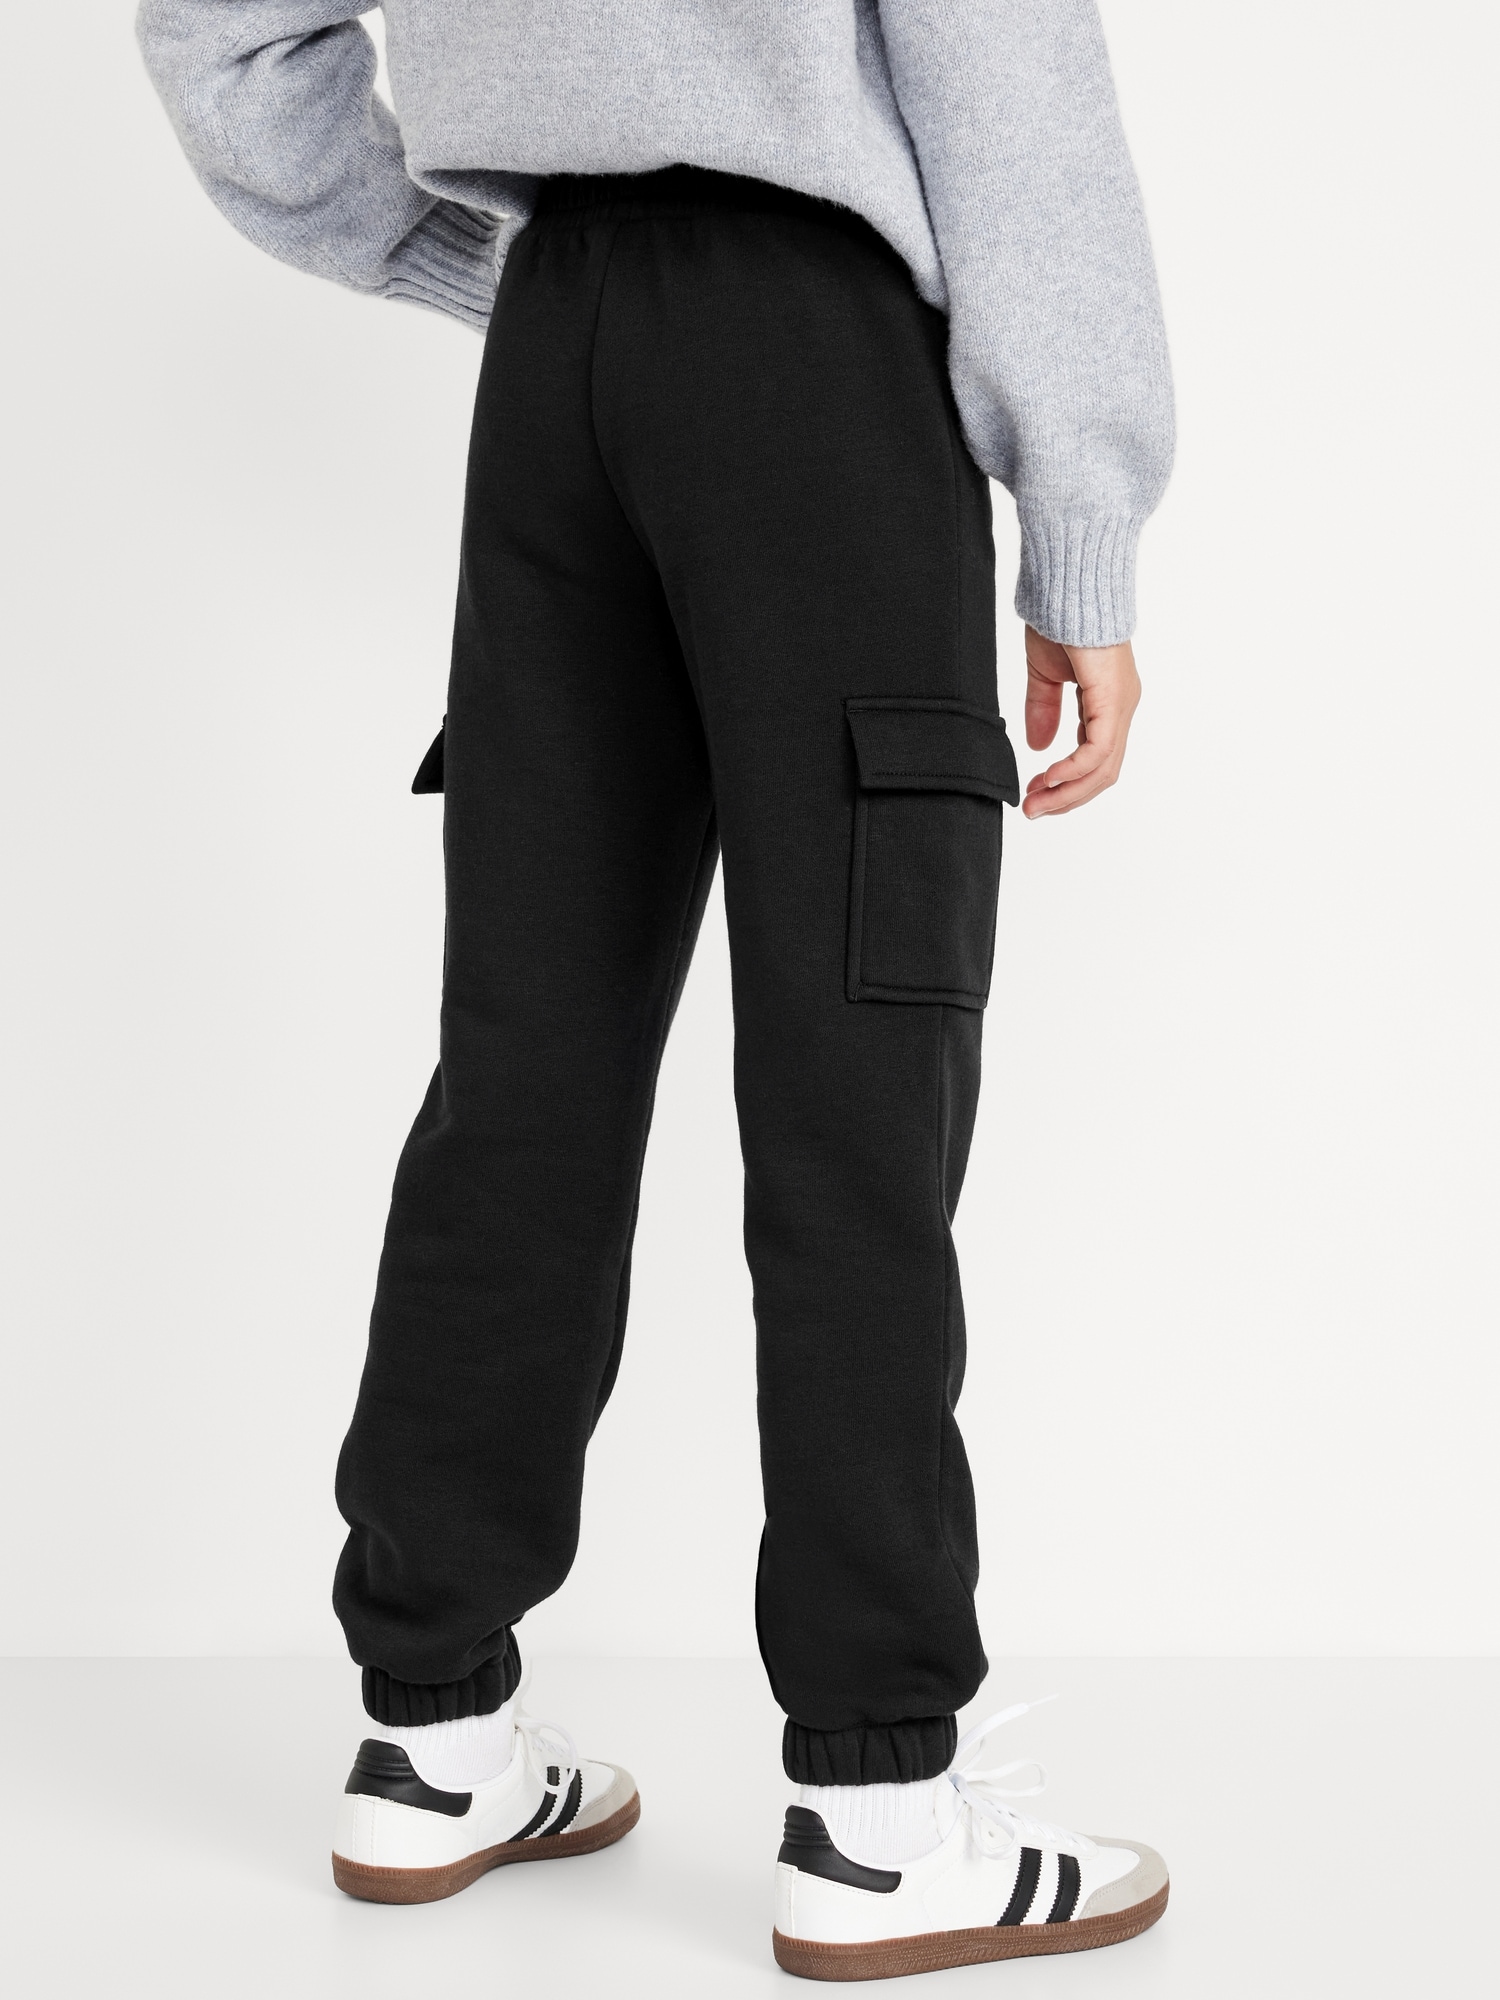 High-Waisted Fleece Cargo Jogger Pants for Girls | Old Navy